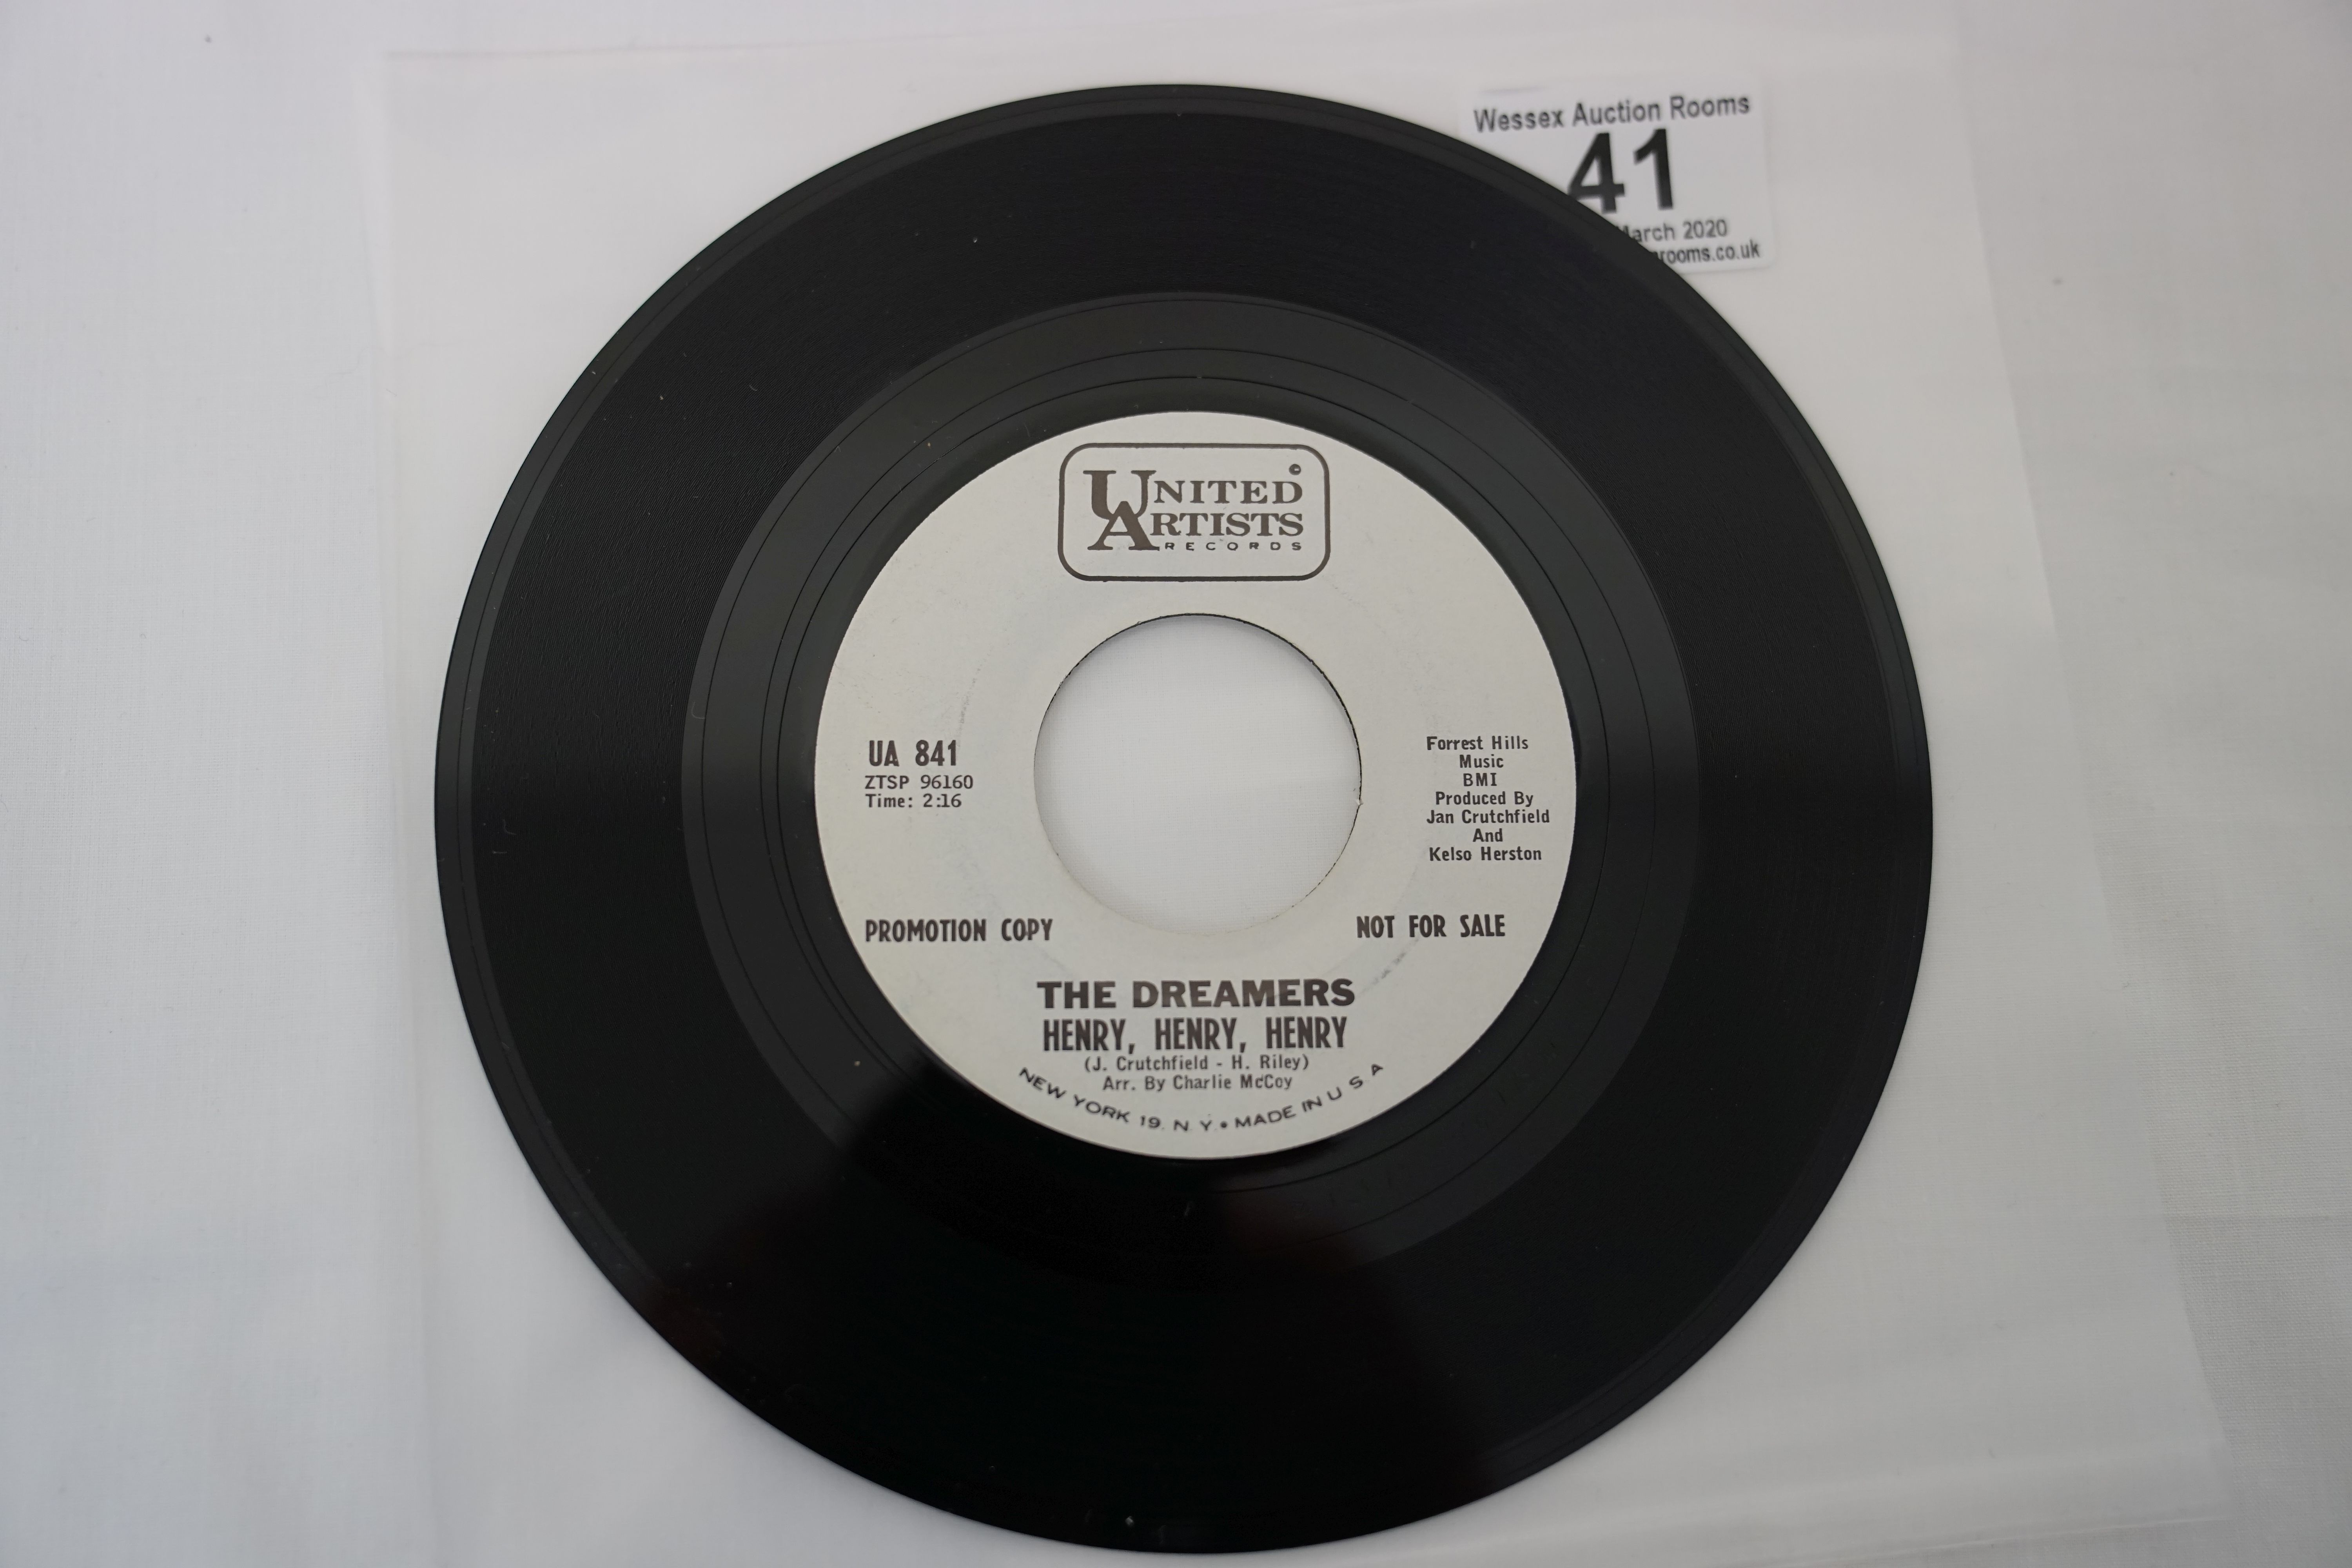 Vinyl - 5 rare original US 1st pressing Northern Soul Promo copies on United Artists Records. - Image 21 of 22